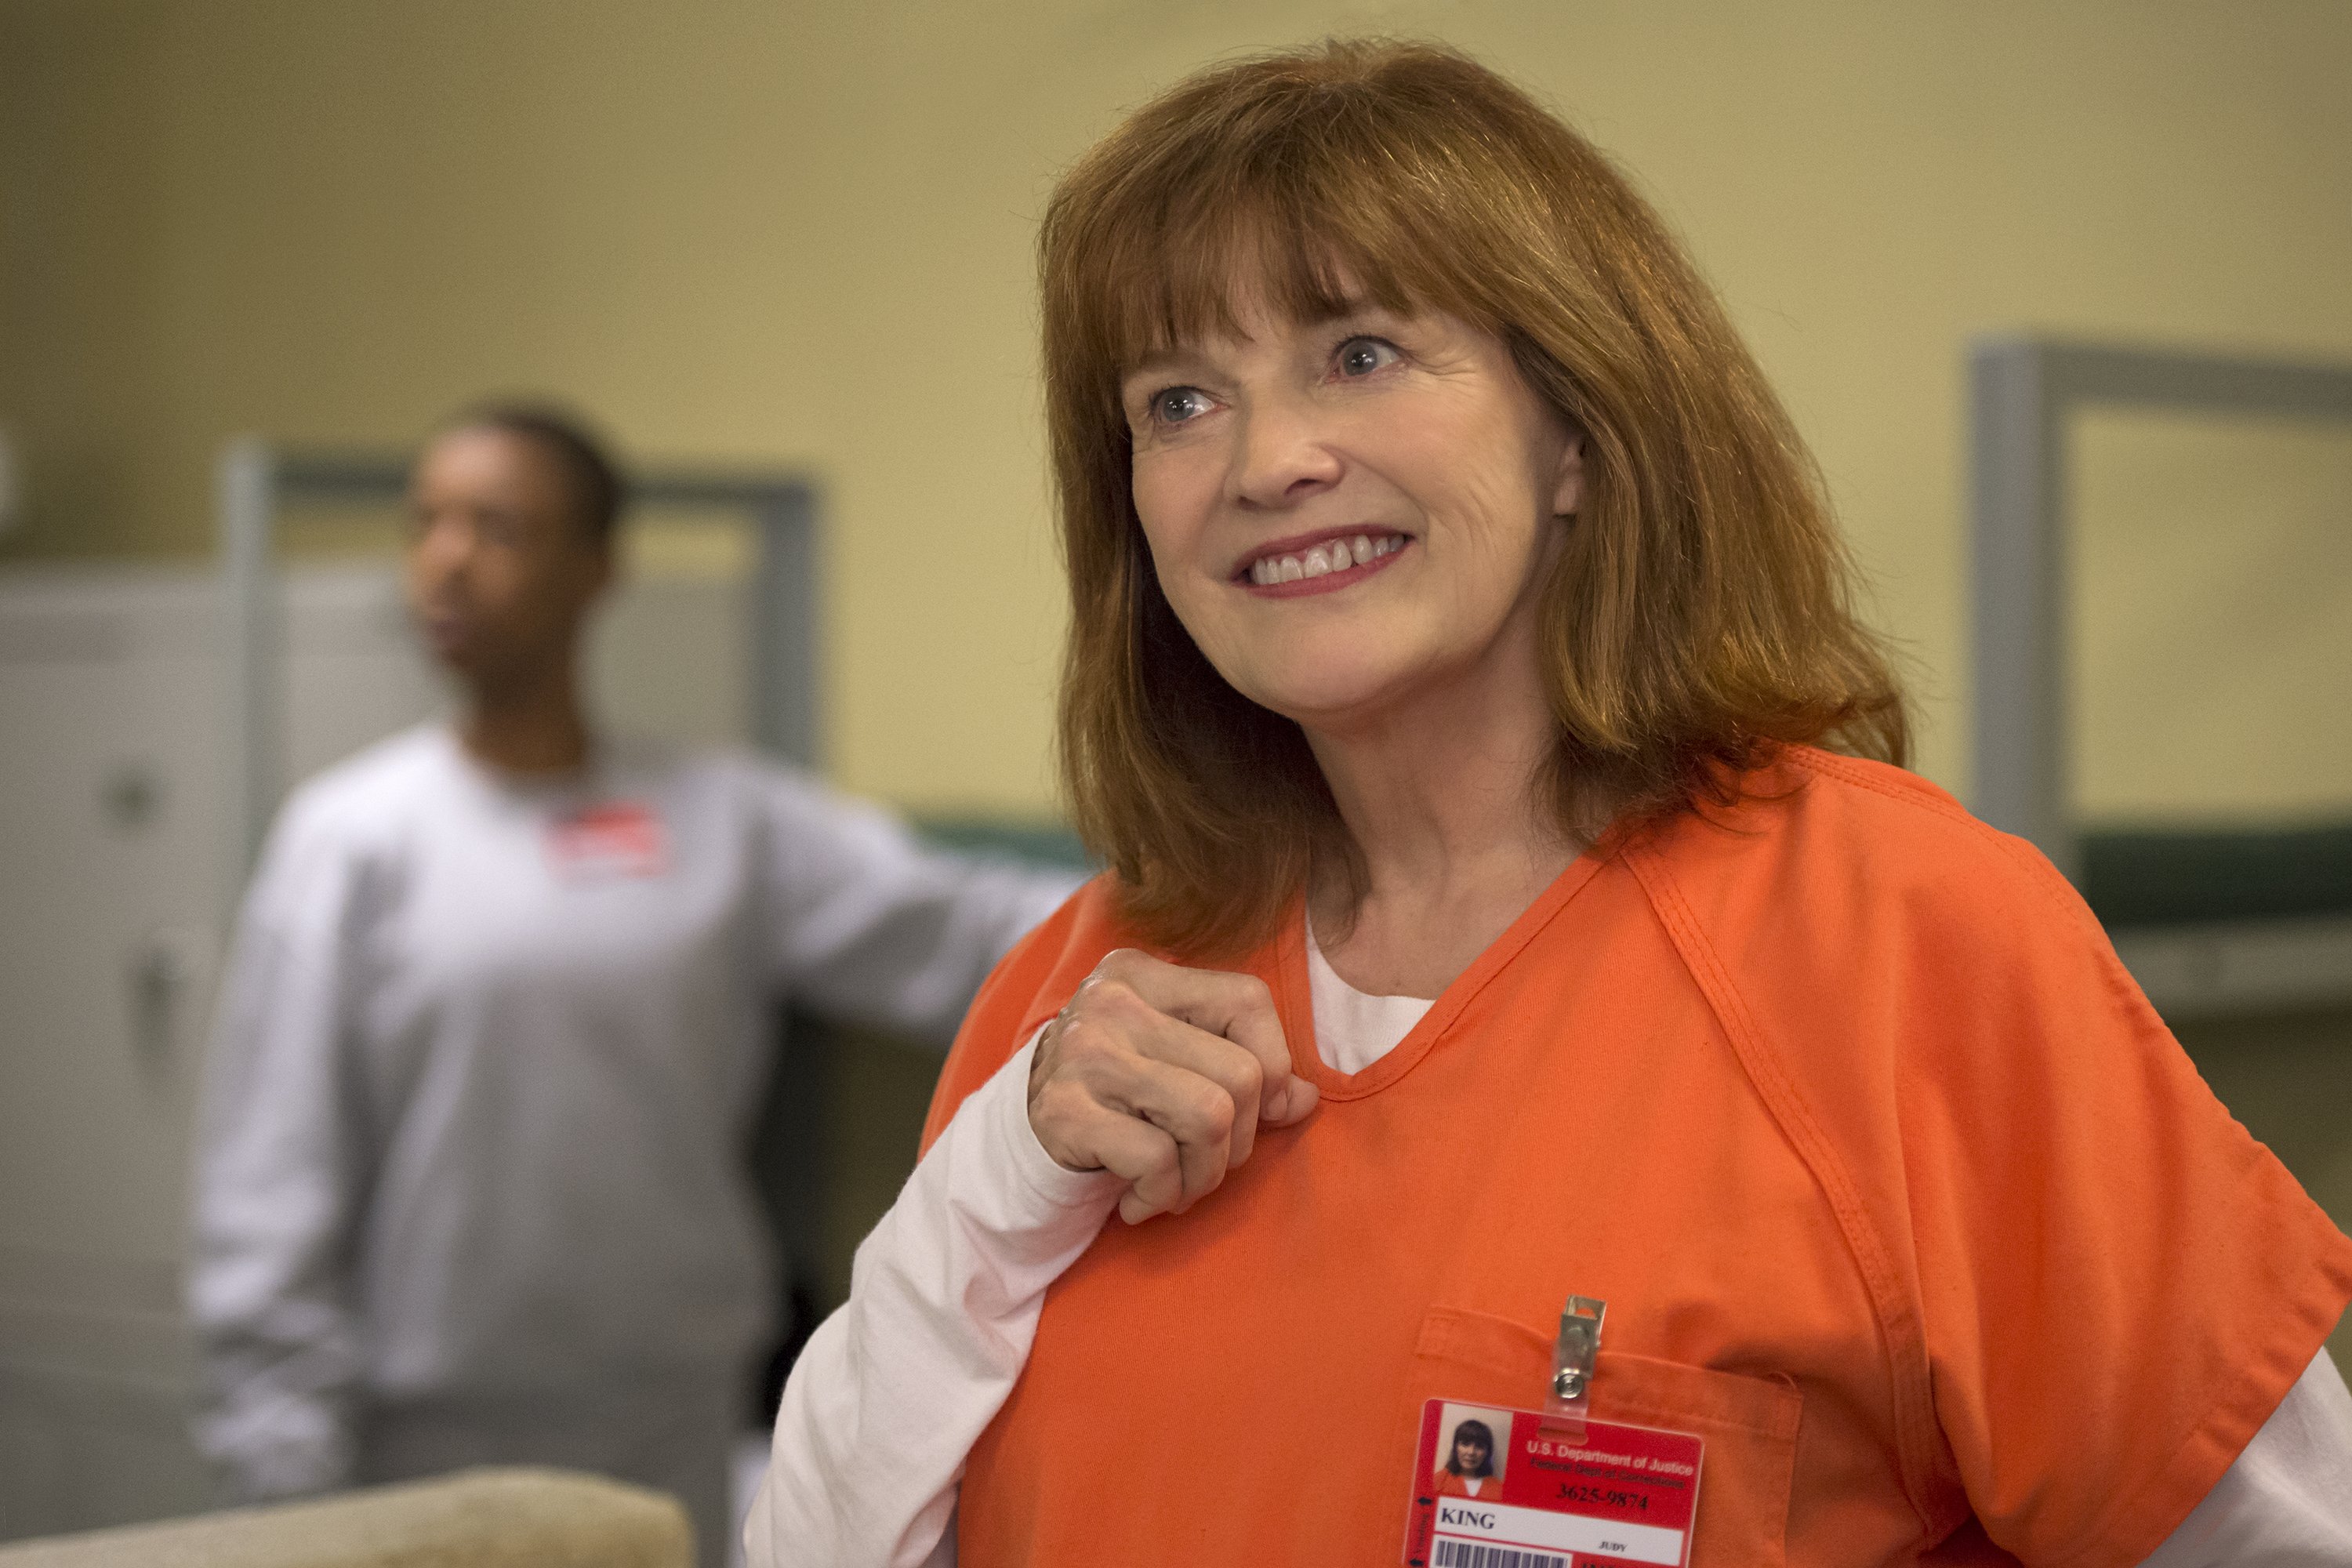 Blair Brown Is Happy To Be Sentenced To A Role On Orange